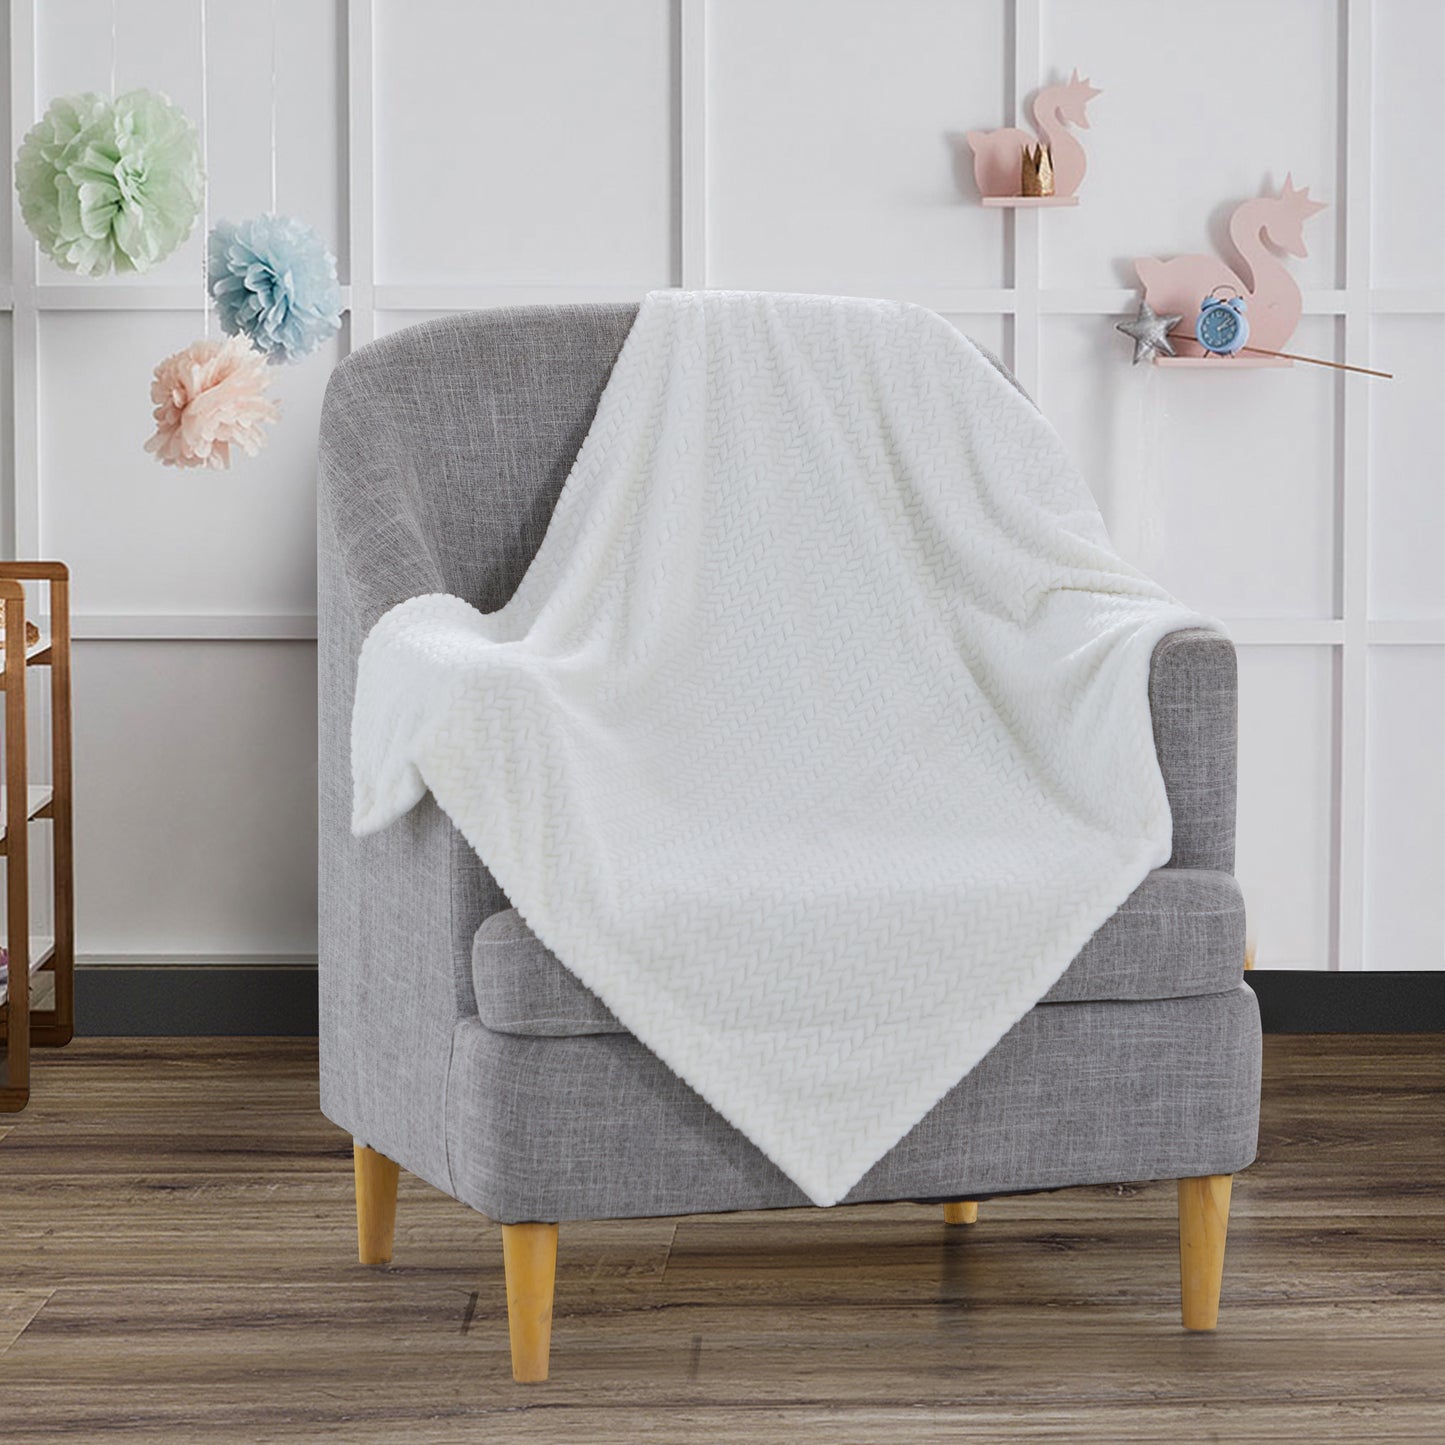 Mon Lapin by Thesis Textured Weave Embossed Baby Blanket - Ivory